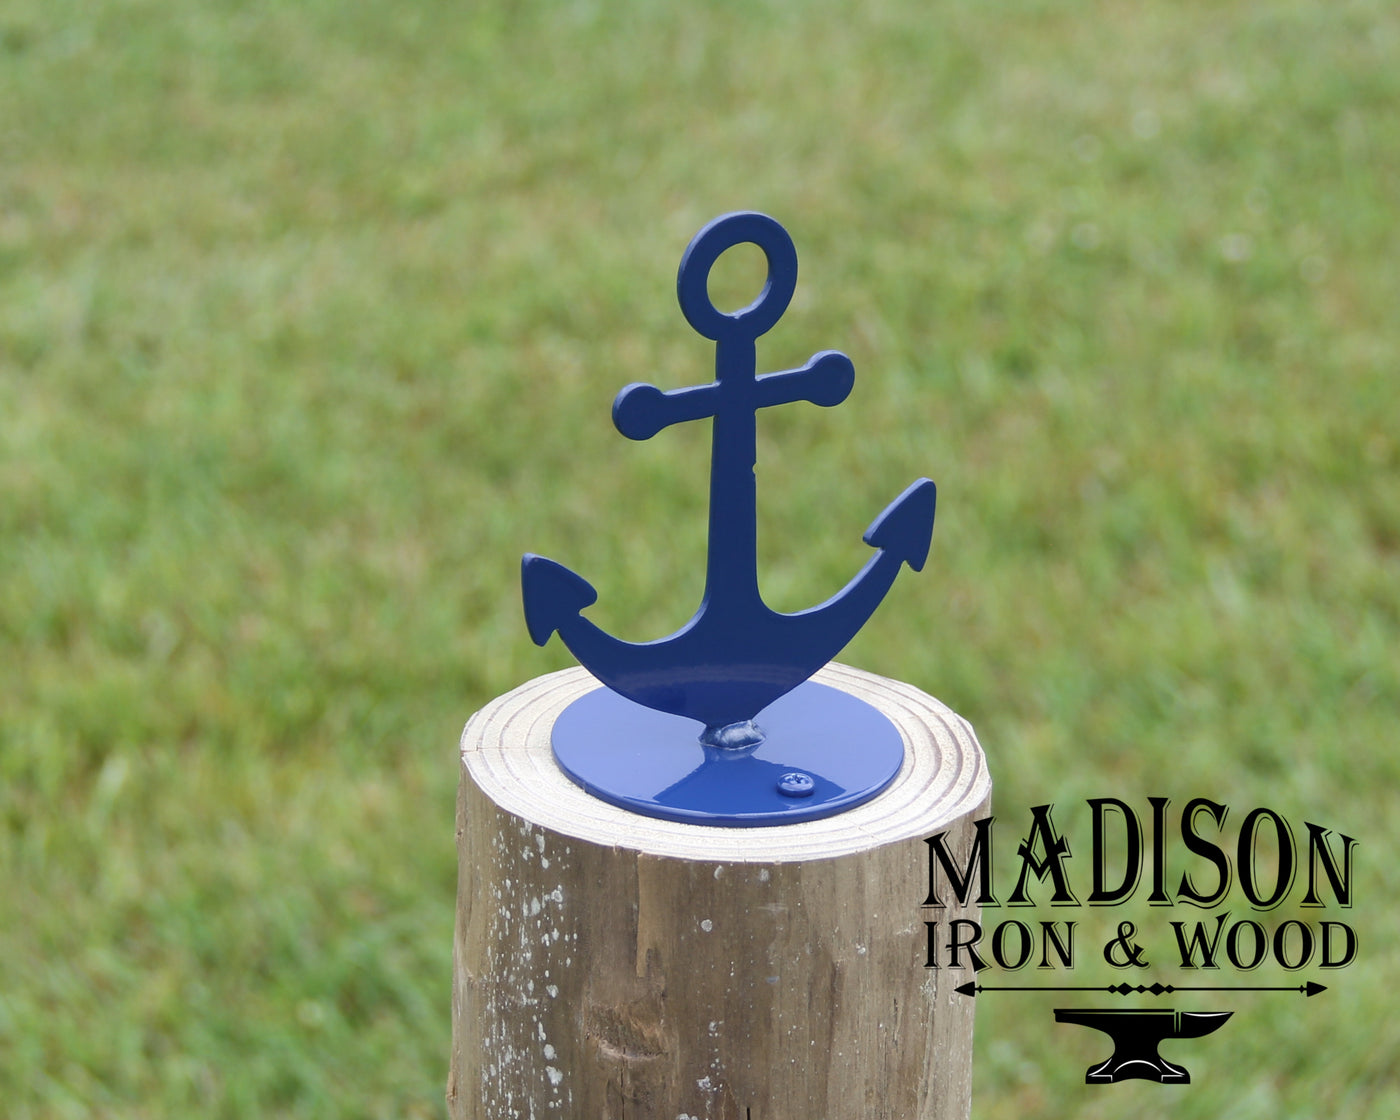 Anchor Post Top For Round Wood Fence Post - Madison Iron and Wood - Post Cap - metal outdoor decor - Steel deocrations - american made products - veteran owned business products - fencing decorations - fencing supplies - custom wall decorations - personalized wall signs - steel - decorative post caps - steel post caps - metal post caps - brackets - structural brackets - home improvement - easter - easter decorations - easter gift - easter yard decor